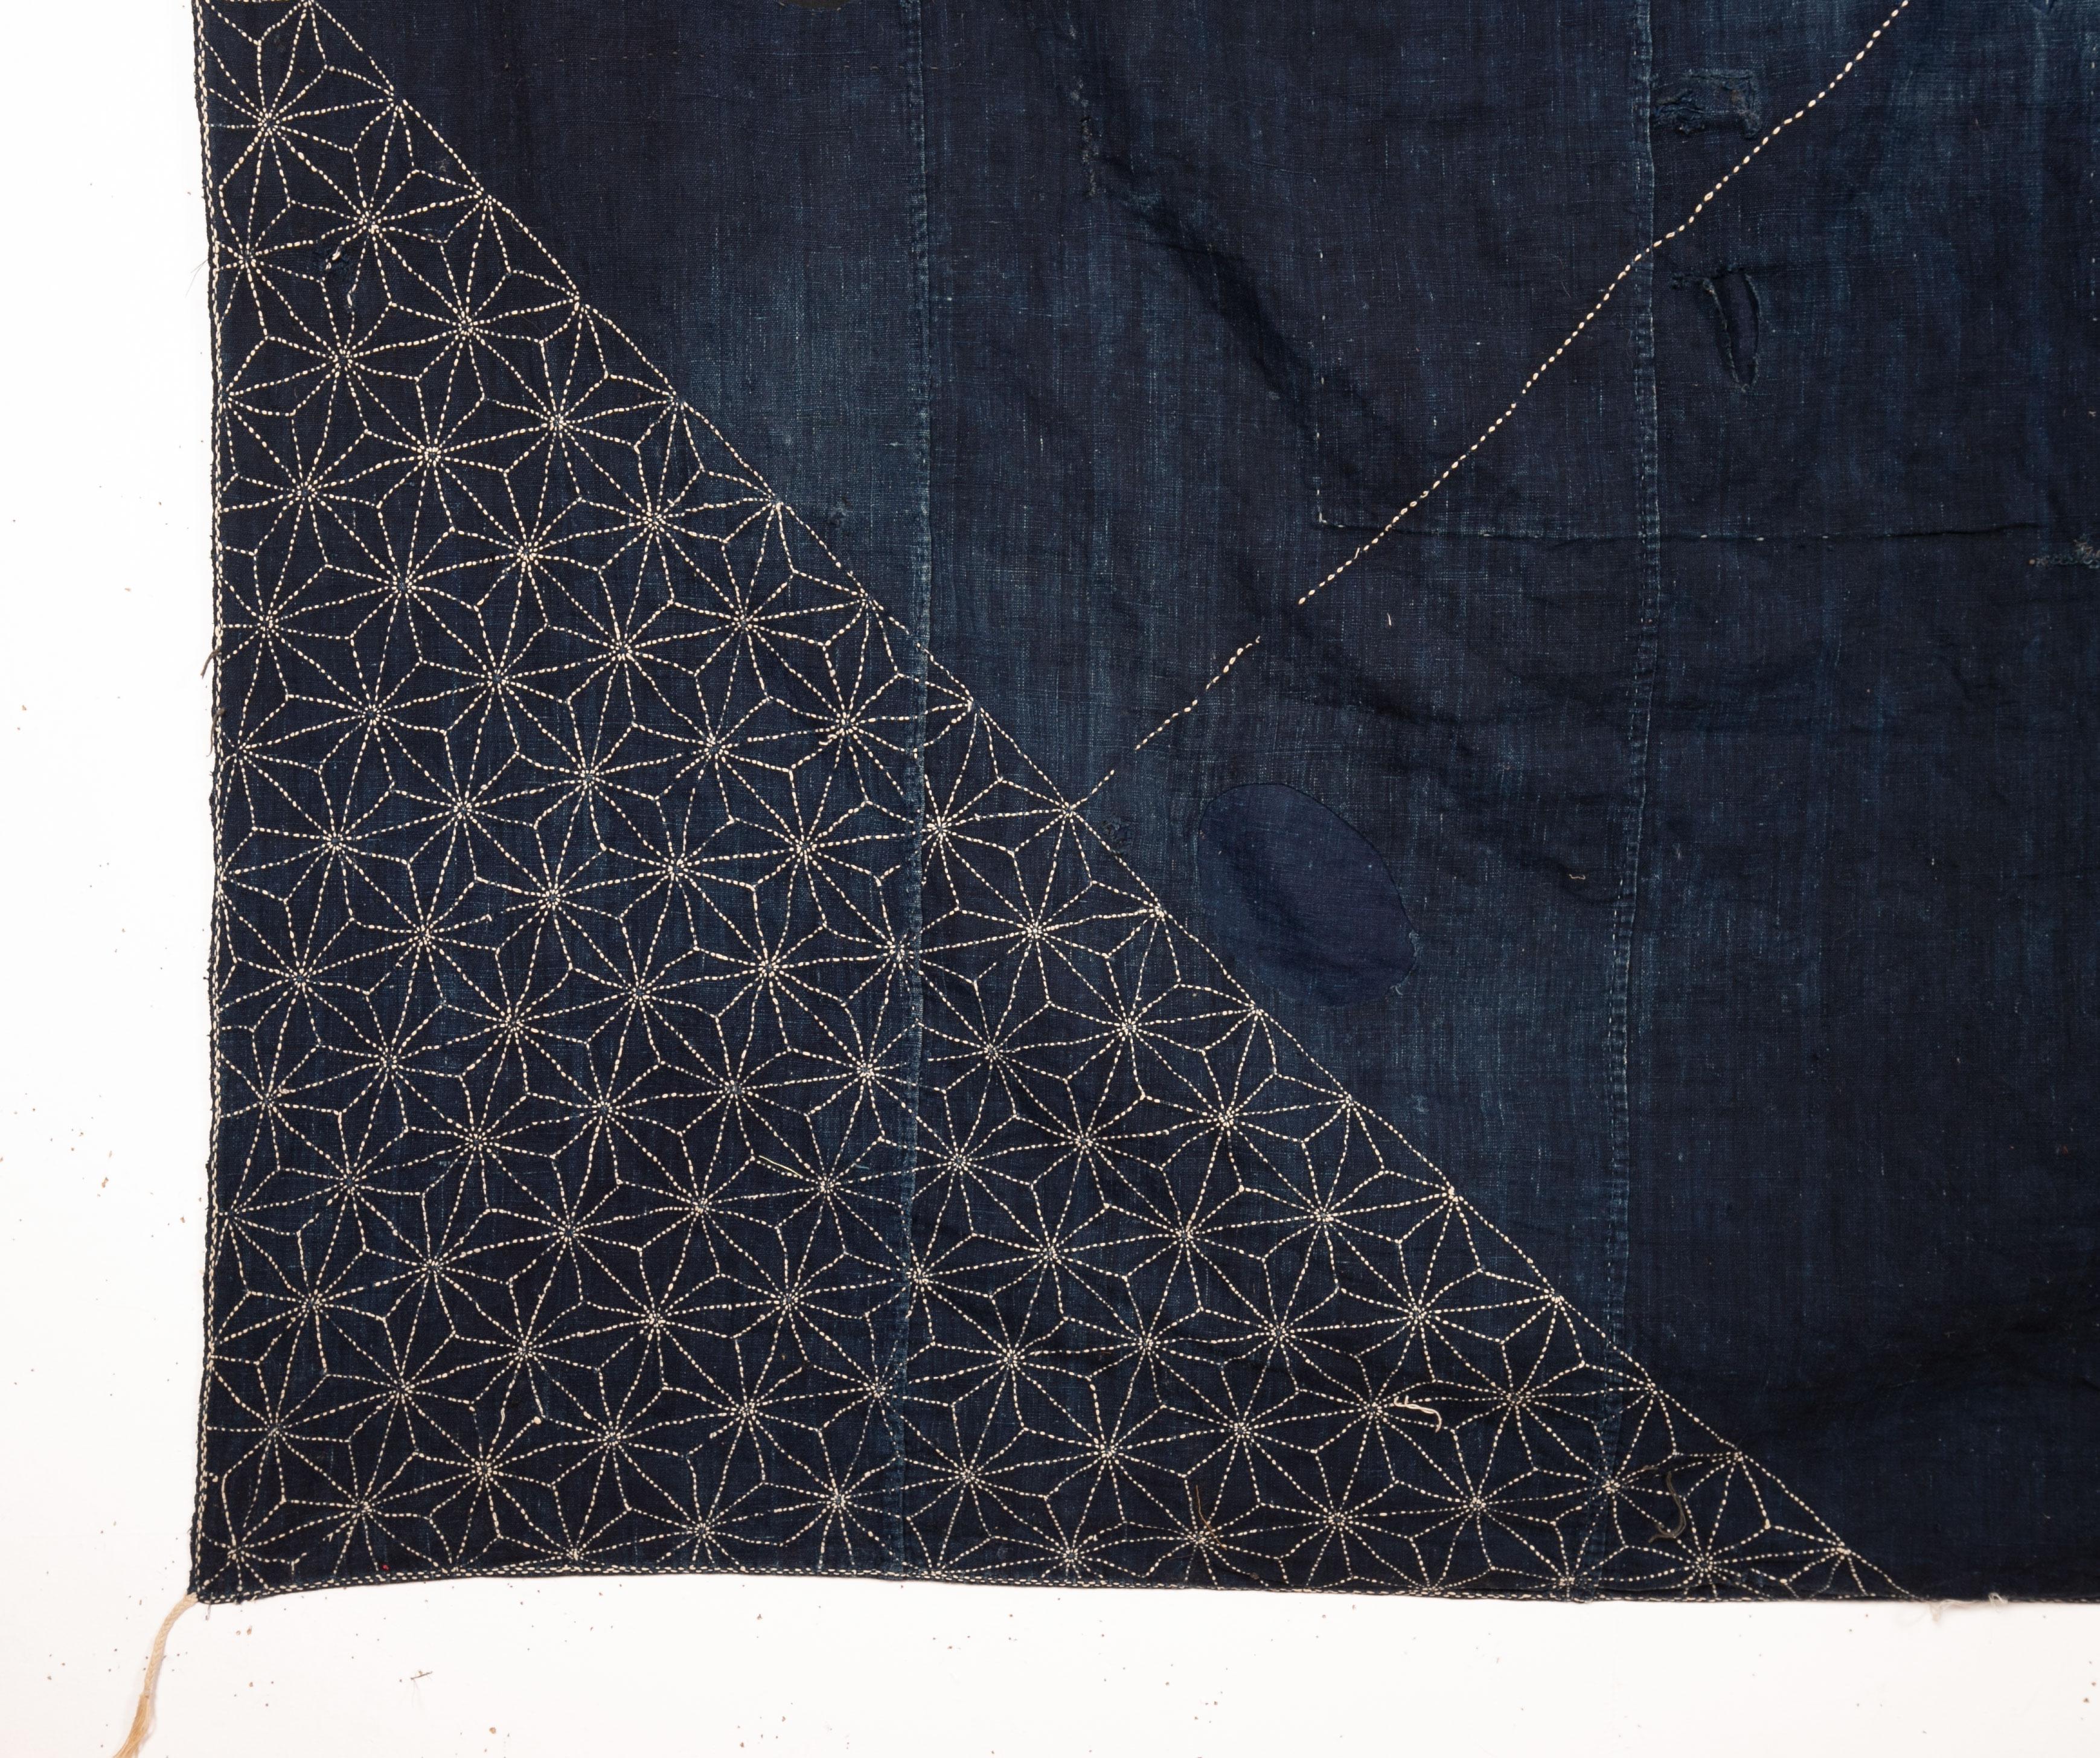 Indigo textile decorated with 'sashimi' stitching. Has some damage including a big patch.